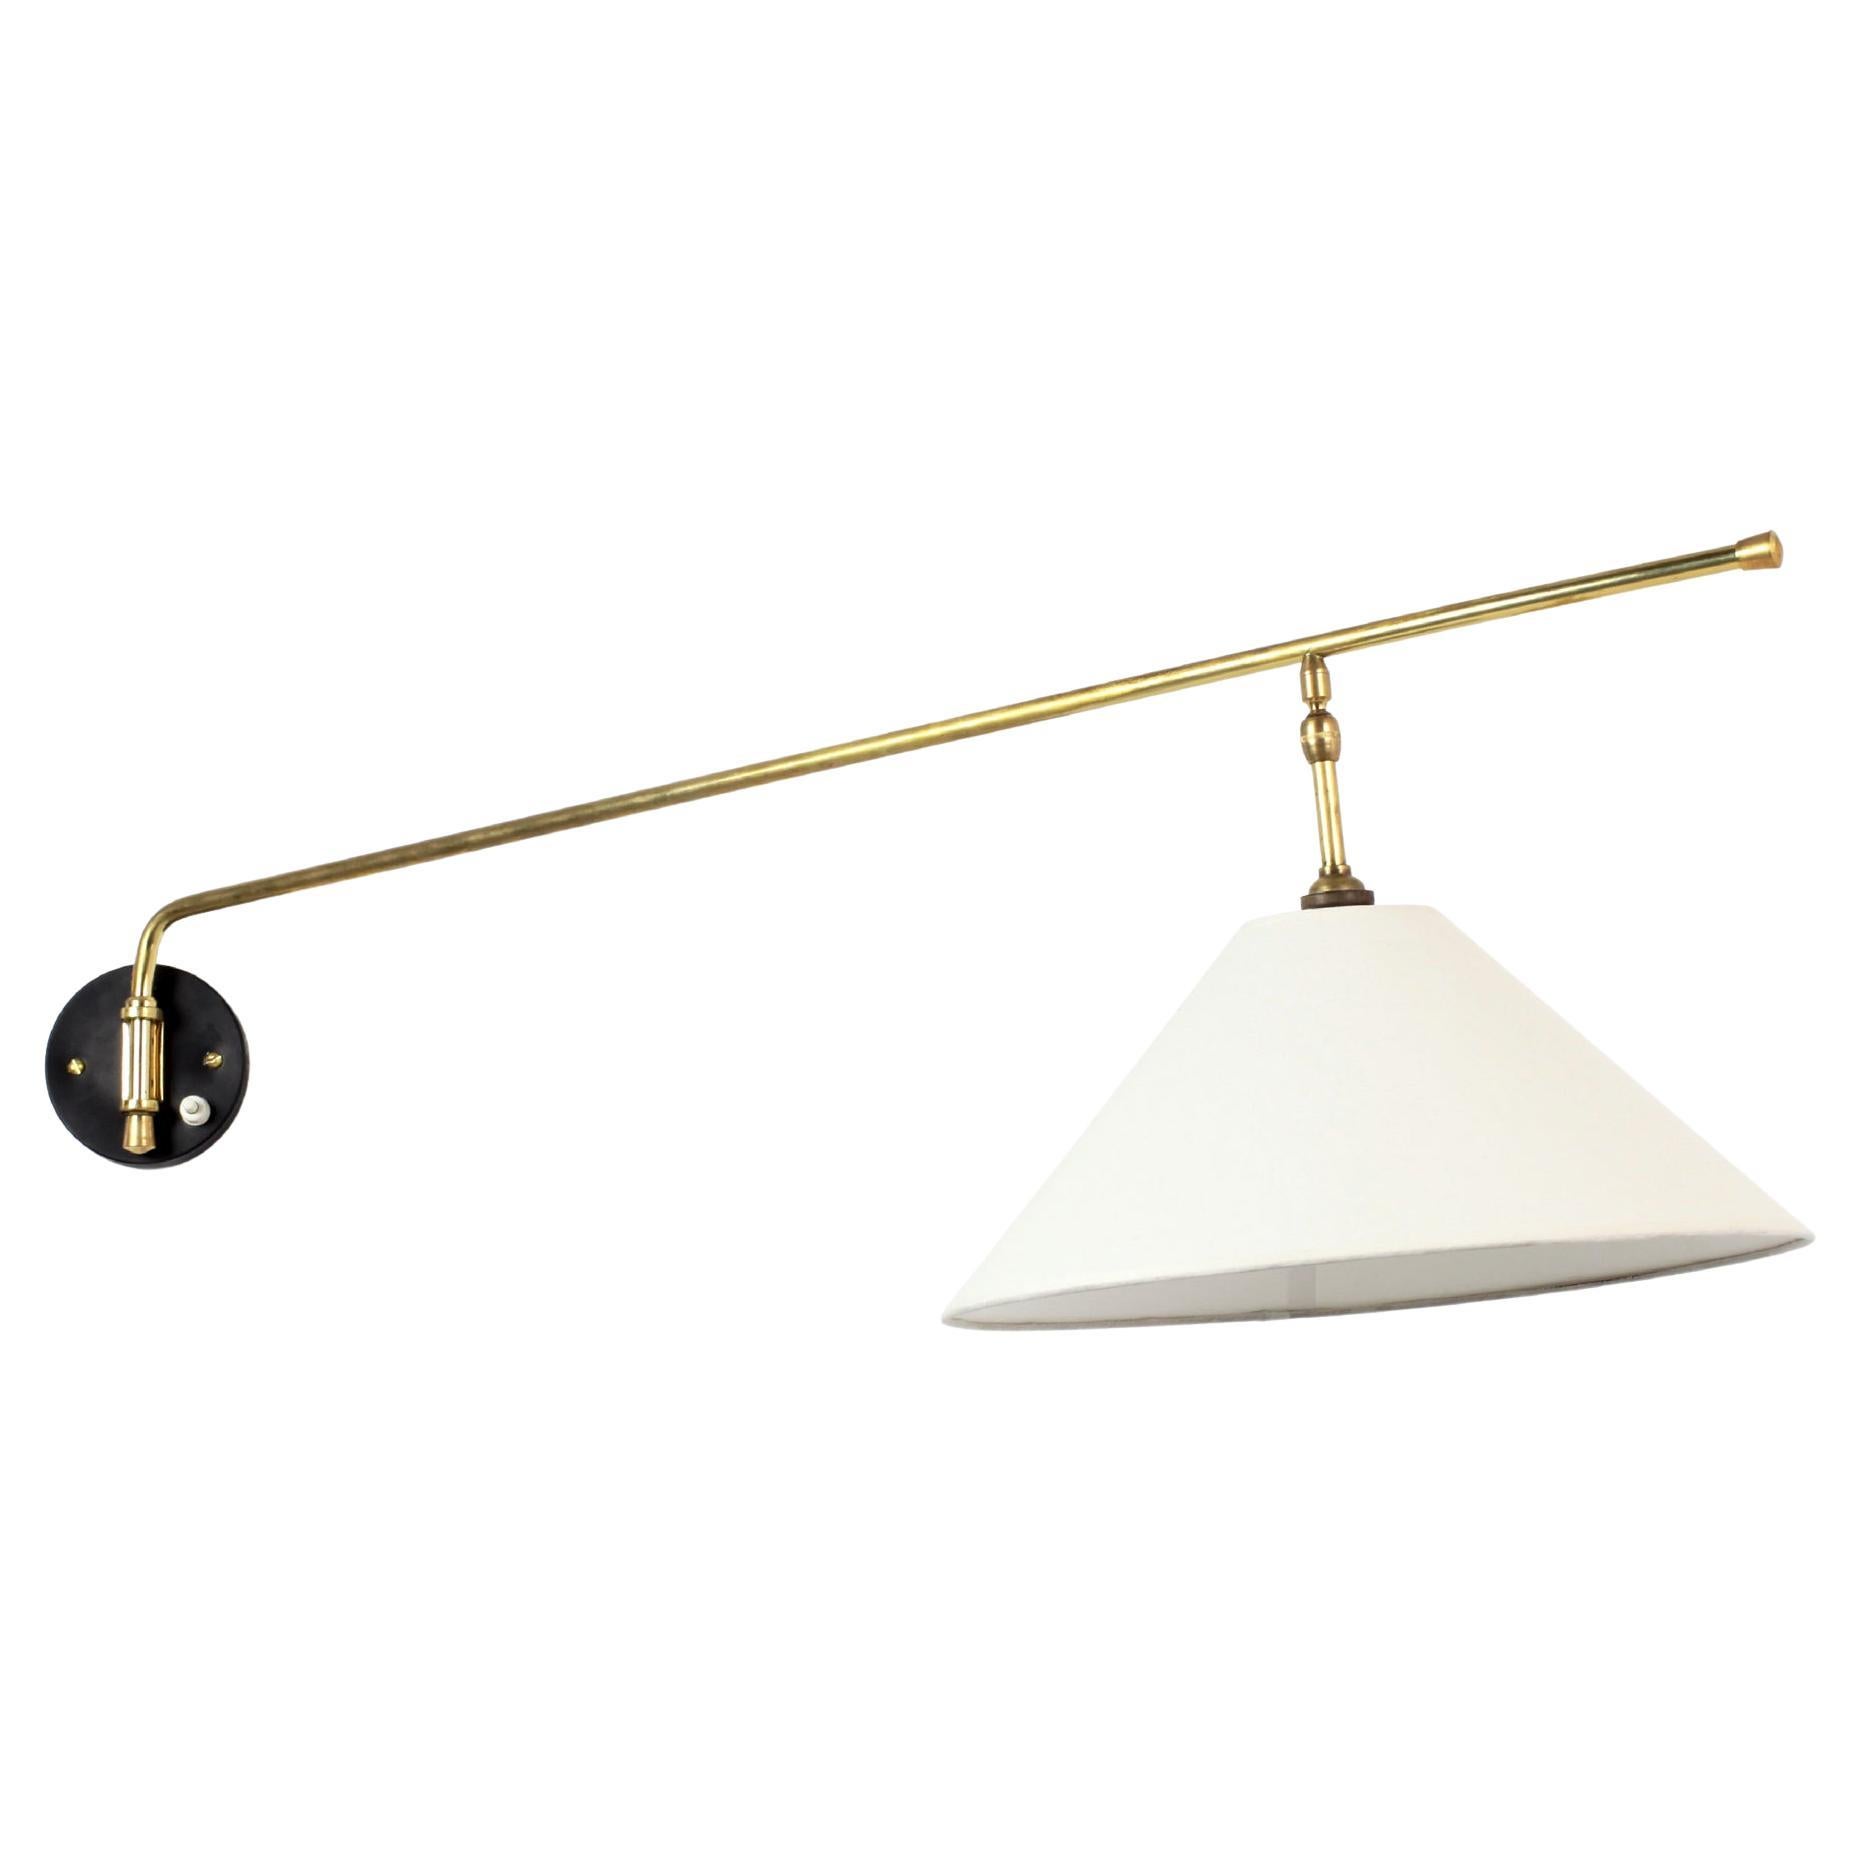 Midcentury Articulated Brass Wall Lamp, France, 1950